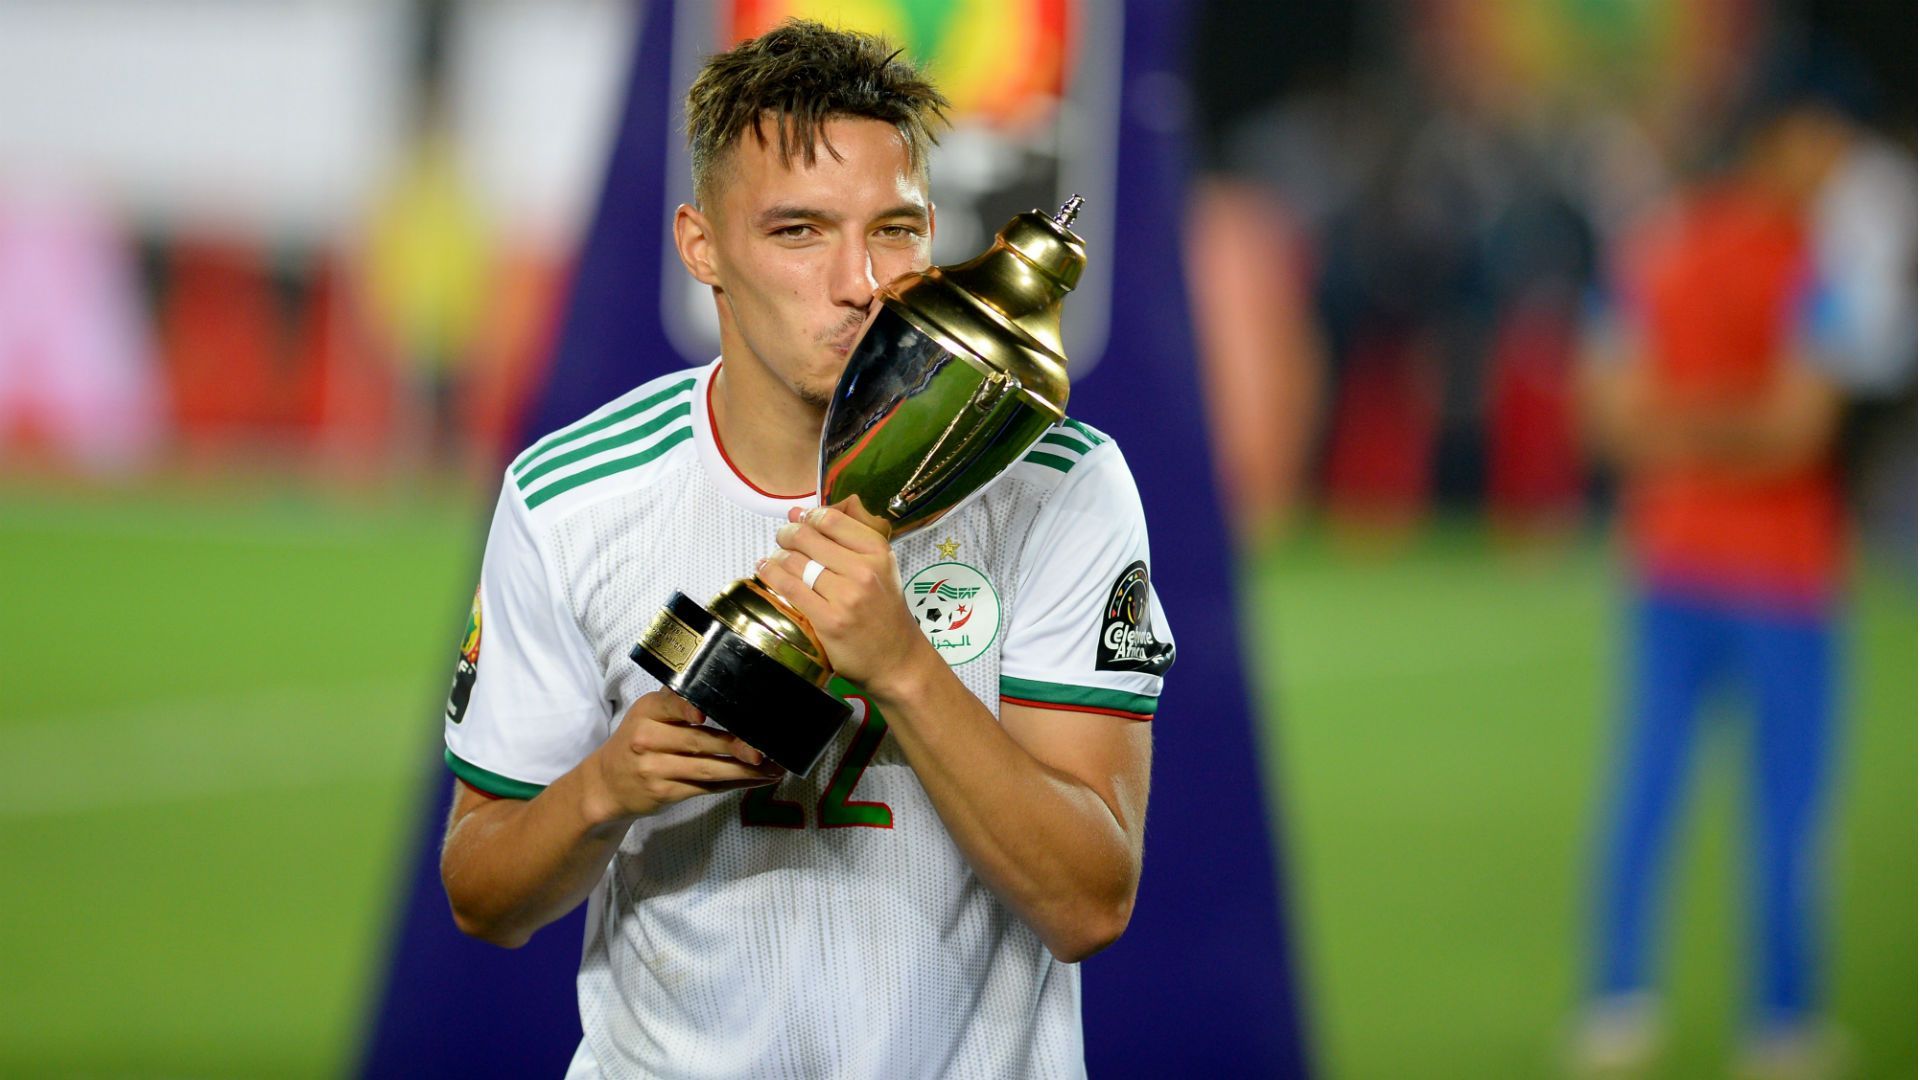 Afcon 2019: Ismael Bennacer named Player of the Tournament